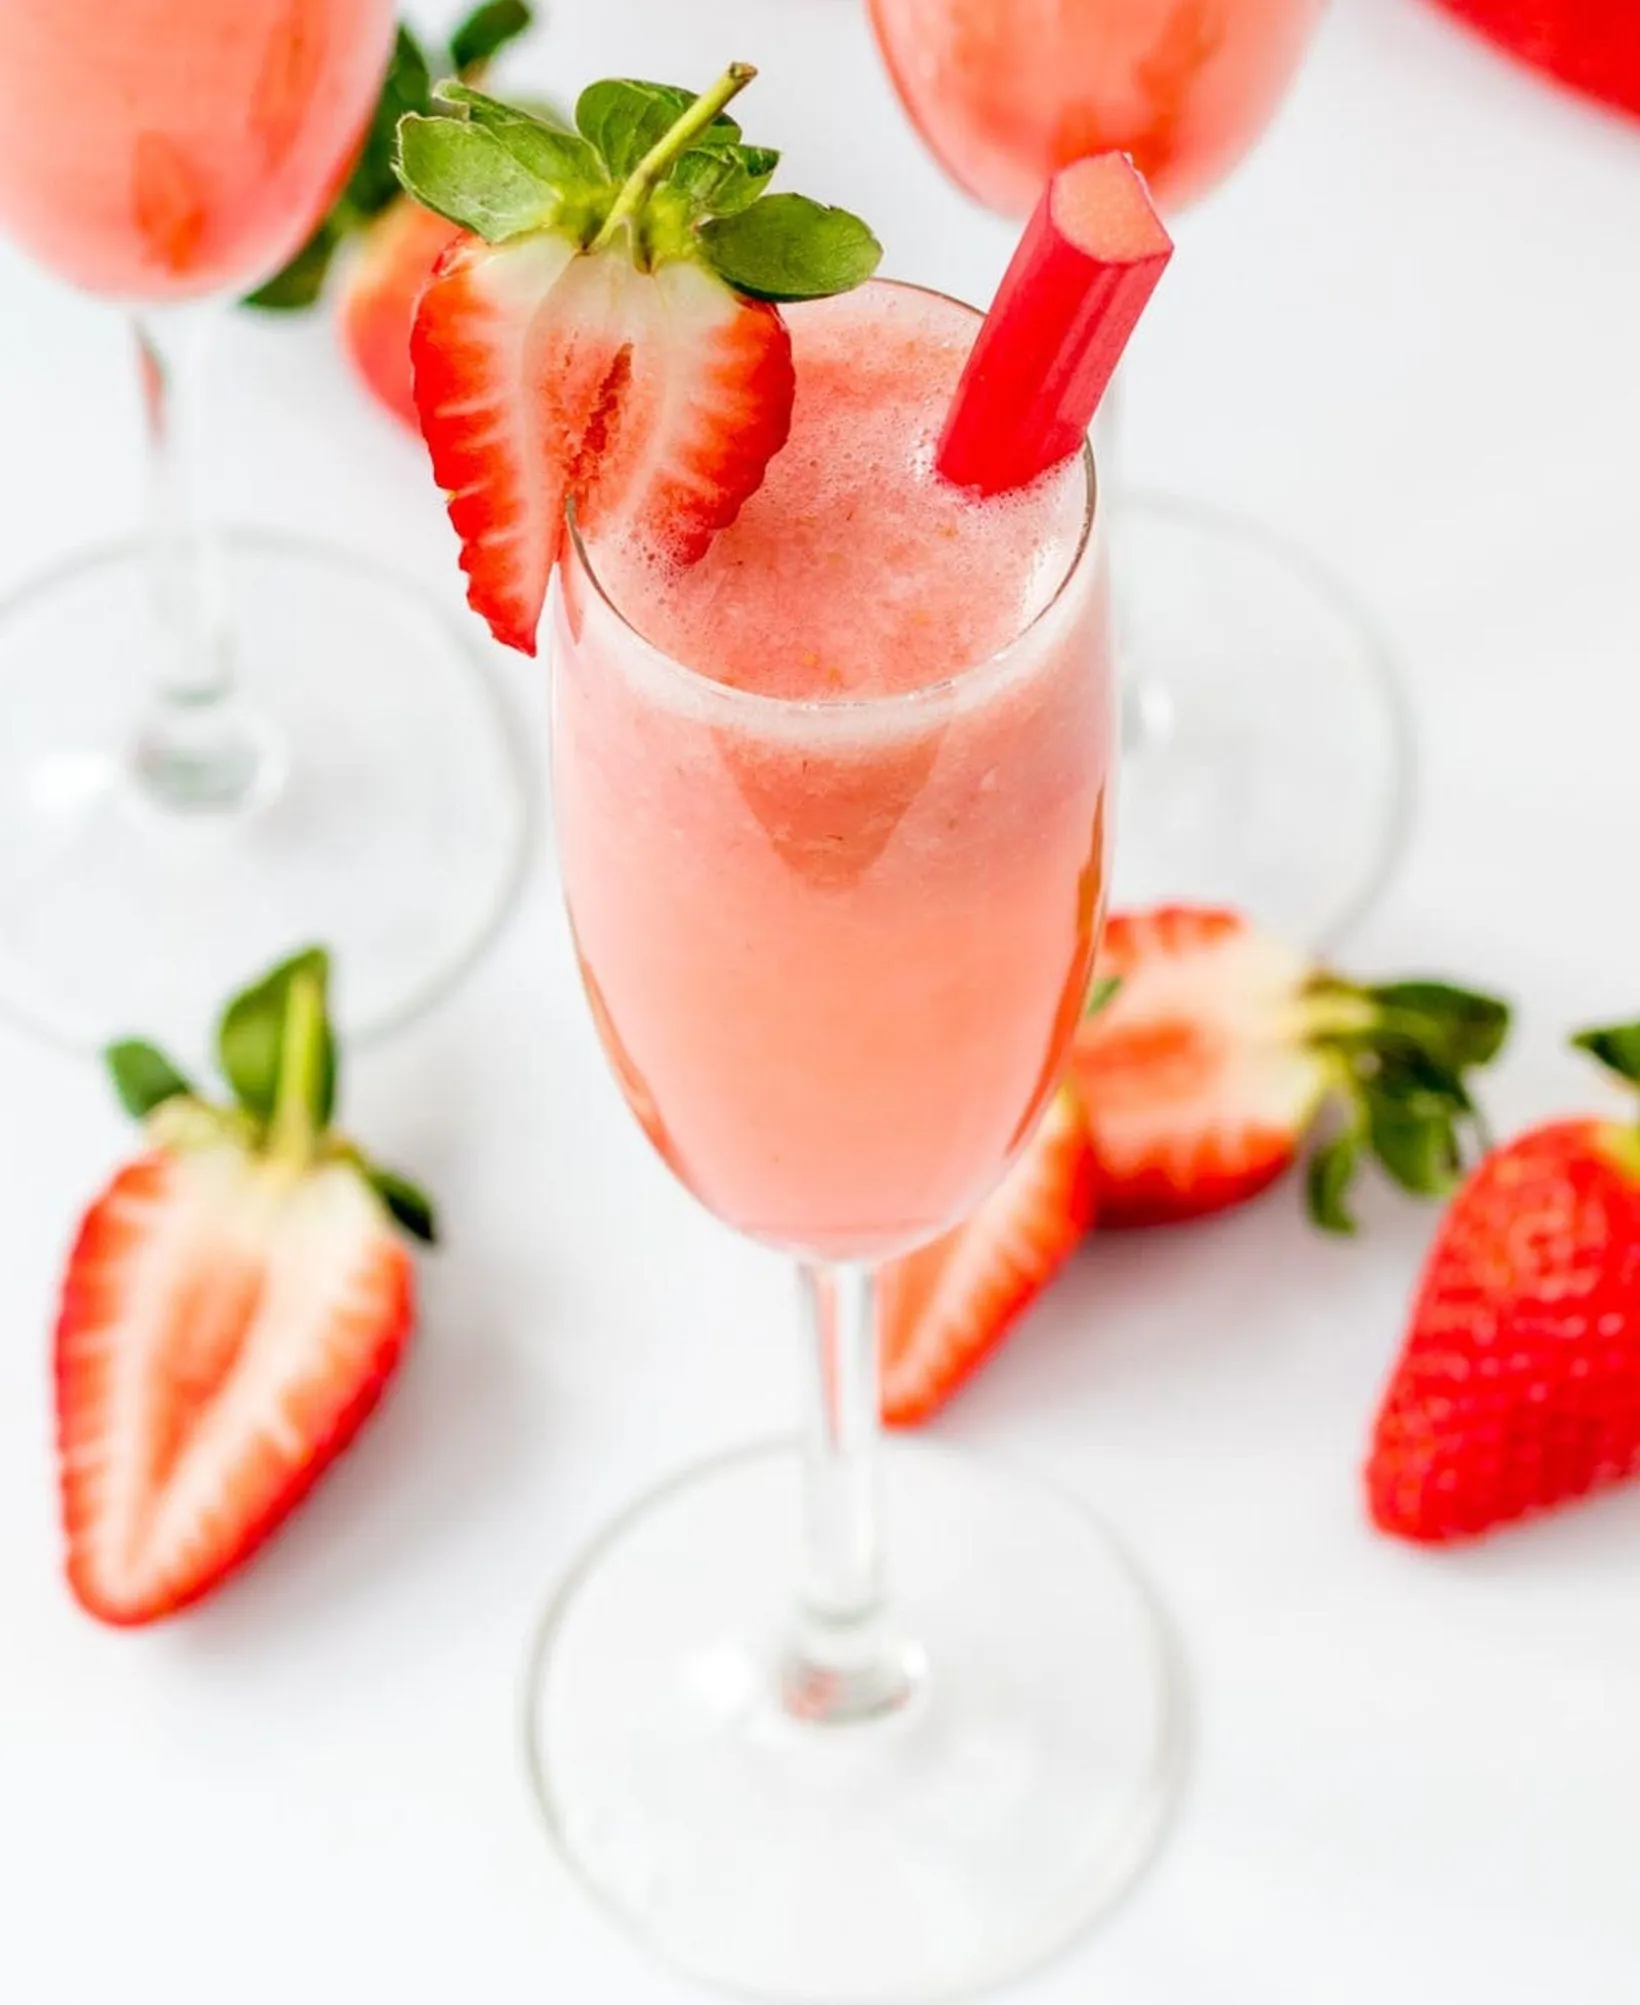 Strawberry And Rhubarb Bellinis- Looking for some tasty and colorful cocktail inspiration? Look no further than our round-up of the 10 most delicious pink cocktails! From refreshing fruity blends to classic favorites, there's something for every taste in this list. So why not mix things up and try one of these pretty pink drinks at your next gathering?